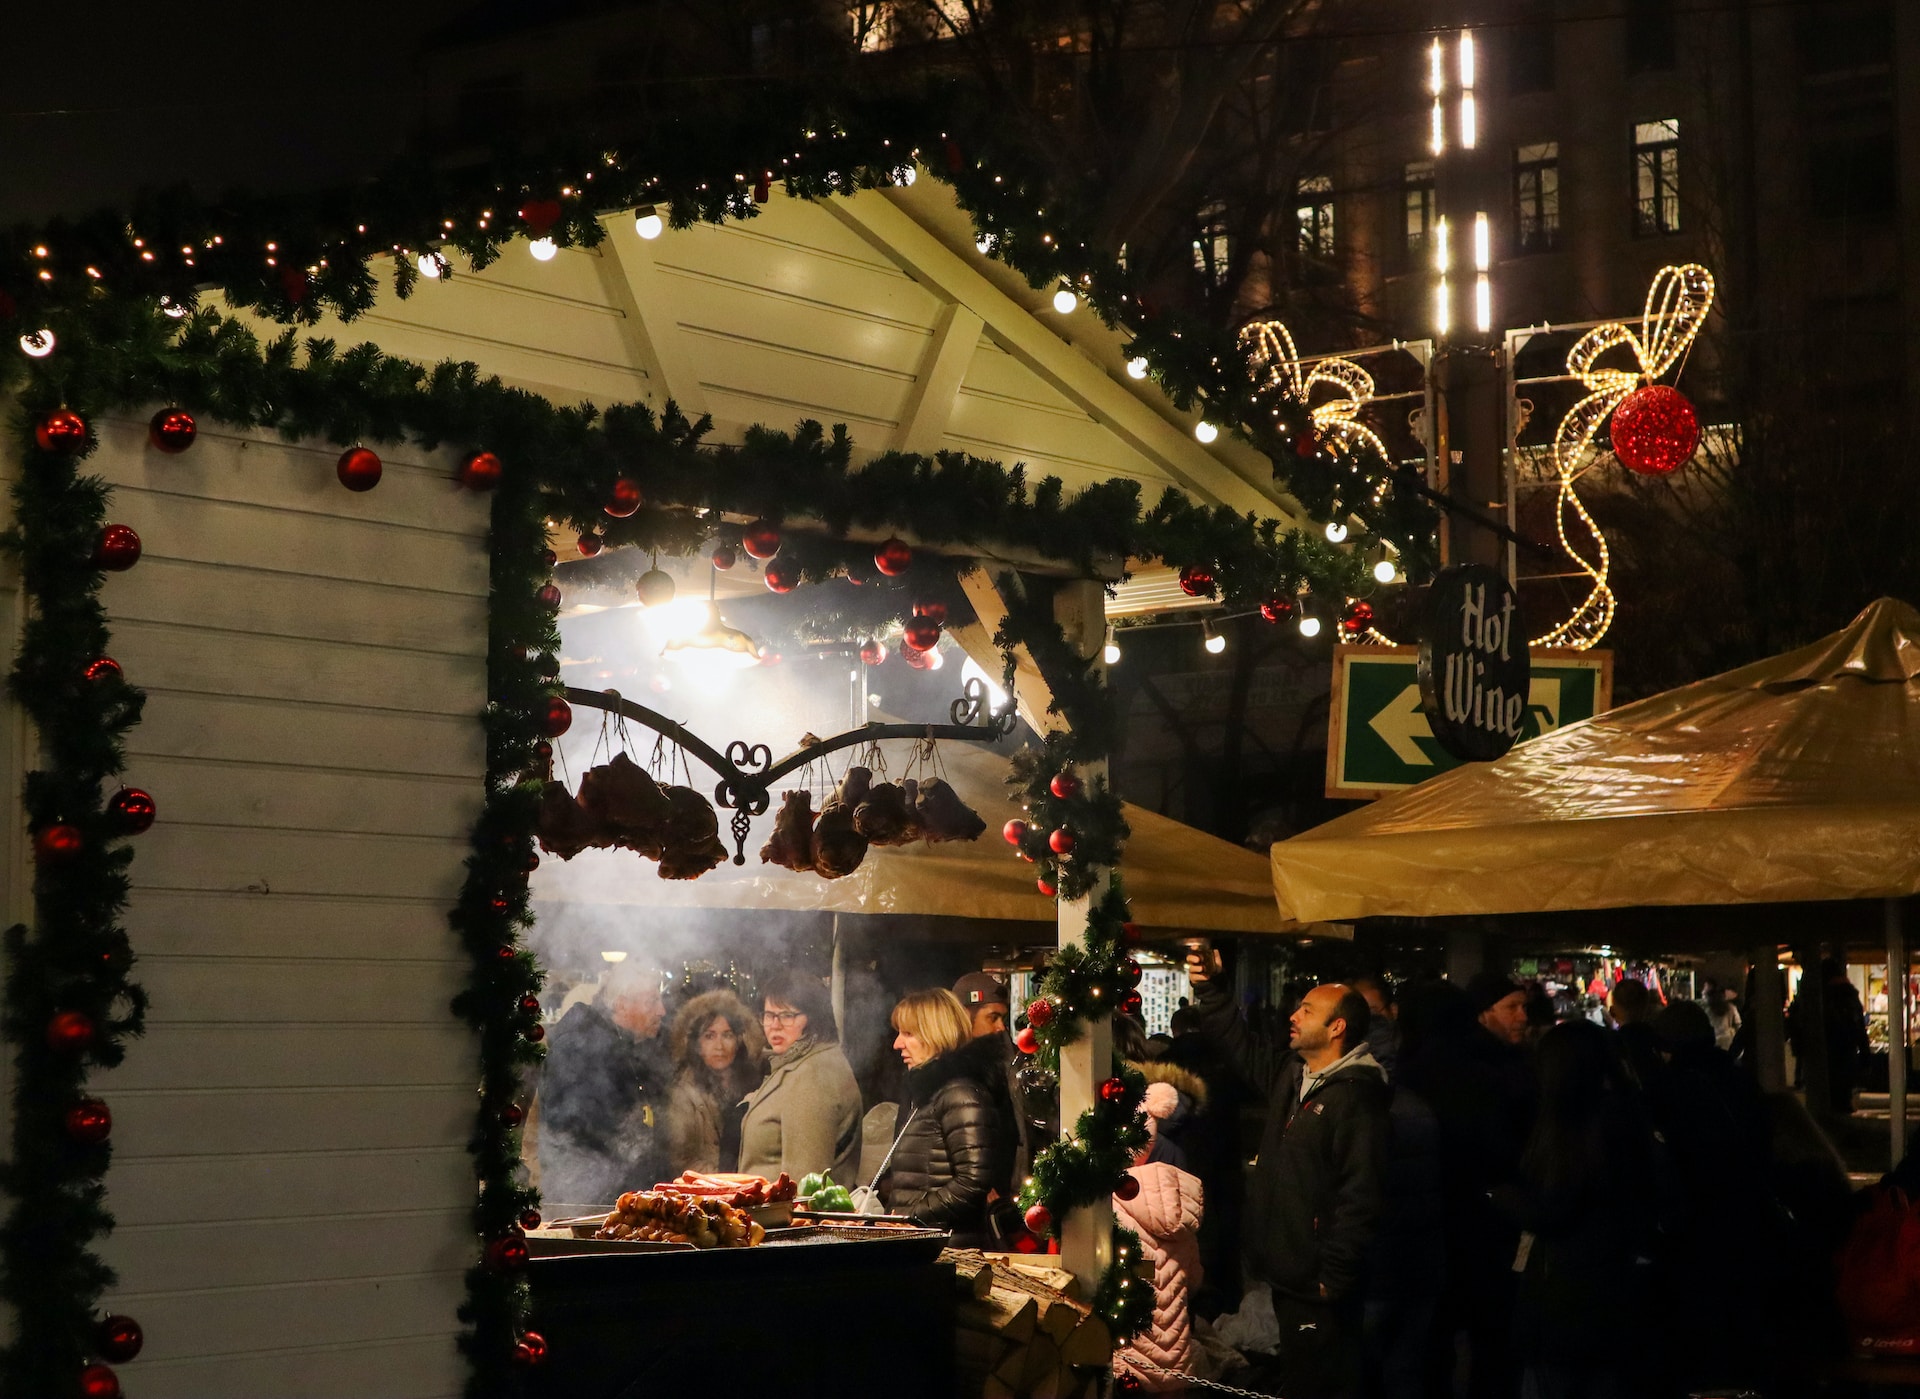 Christmas in Hungary is an unique period to visit the country and witness its colorful traditions.